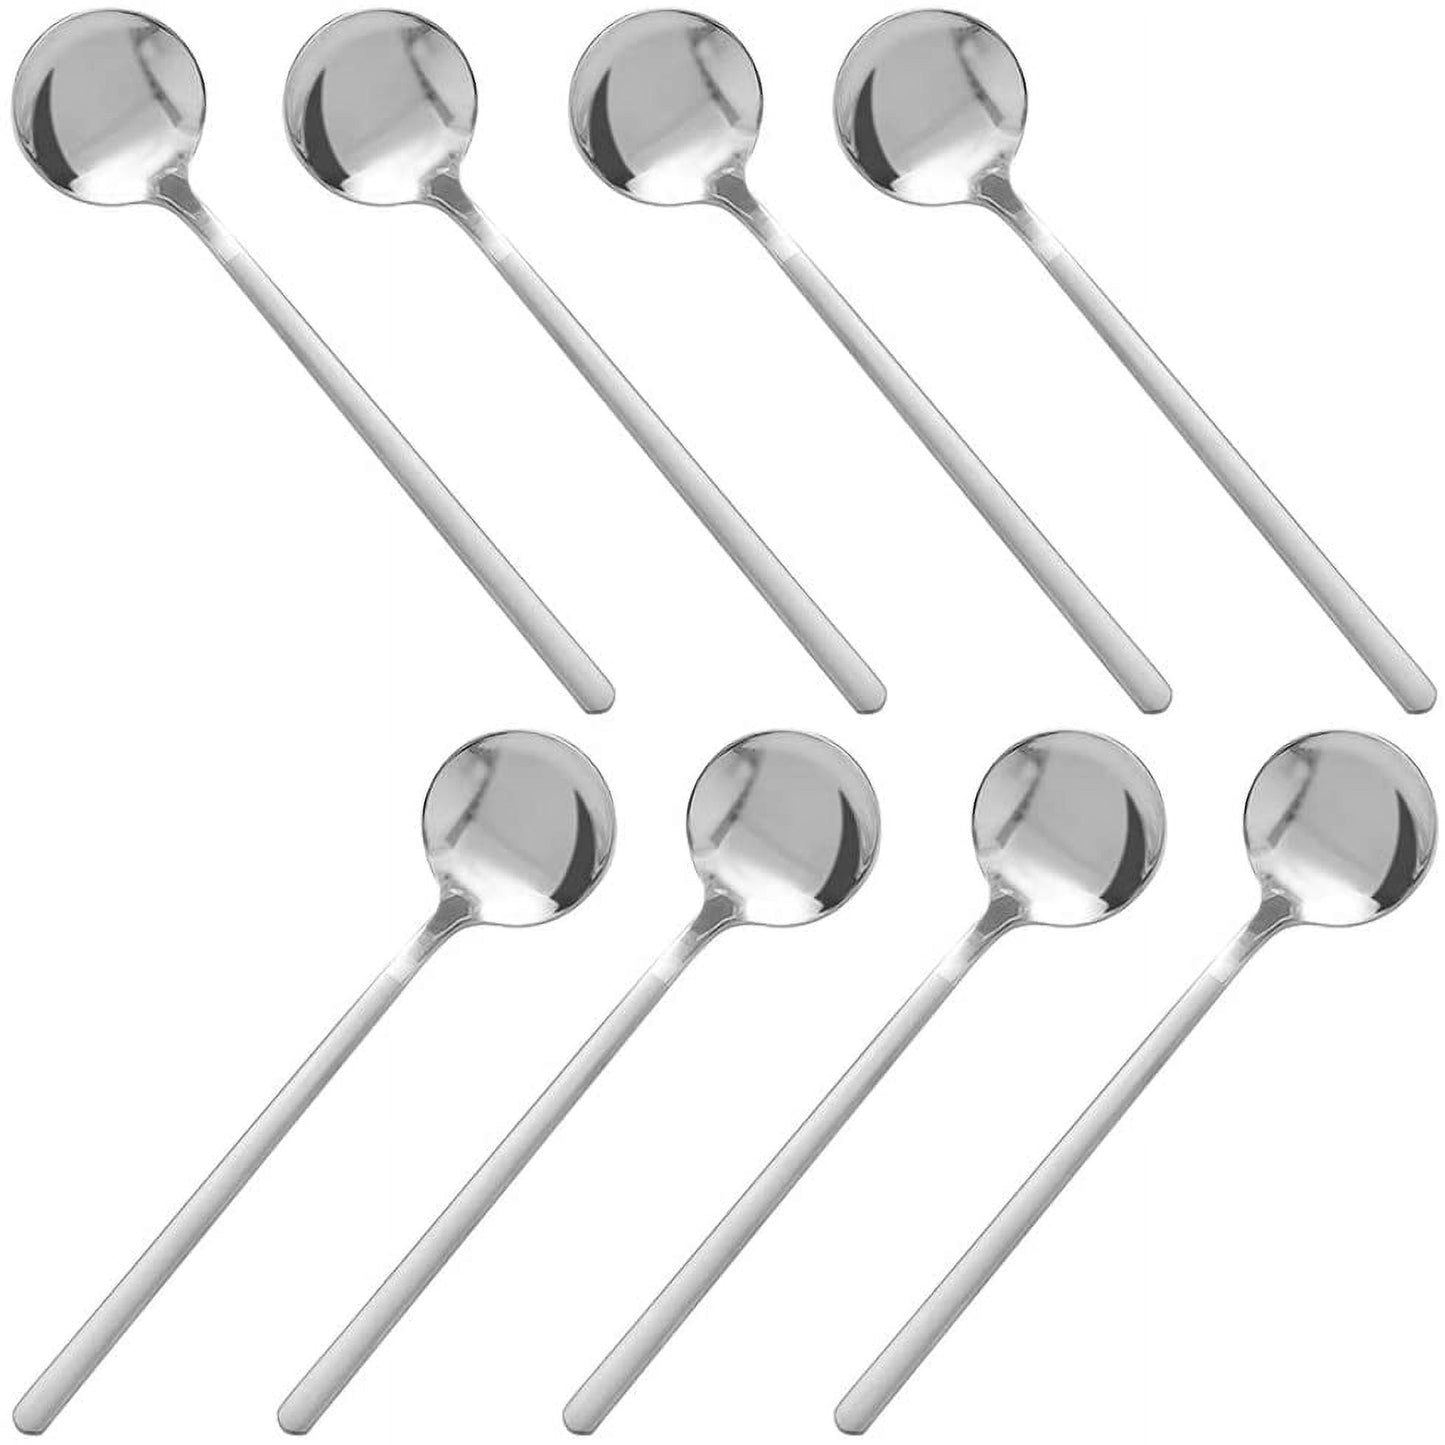 Pack of 8, Stainless Steel Espresso Spoons, findTop Mini Teaspoons Set for Coffee British Tea Dessert Cake Ice Cream Cappuccino, 5.3 Inch